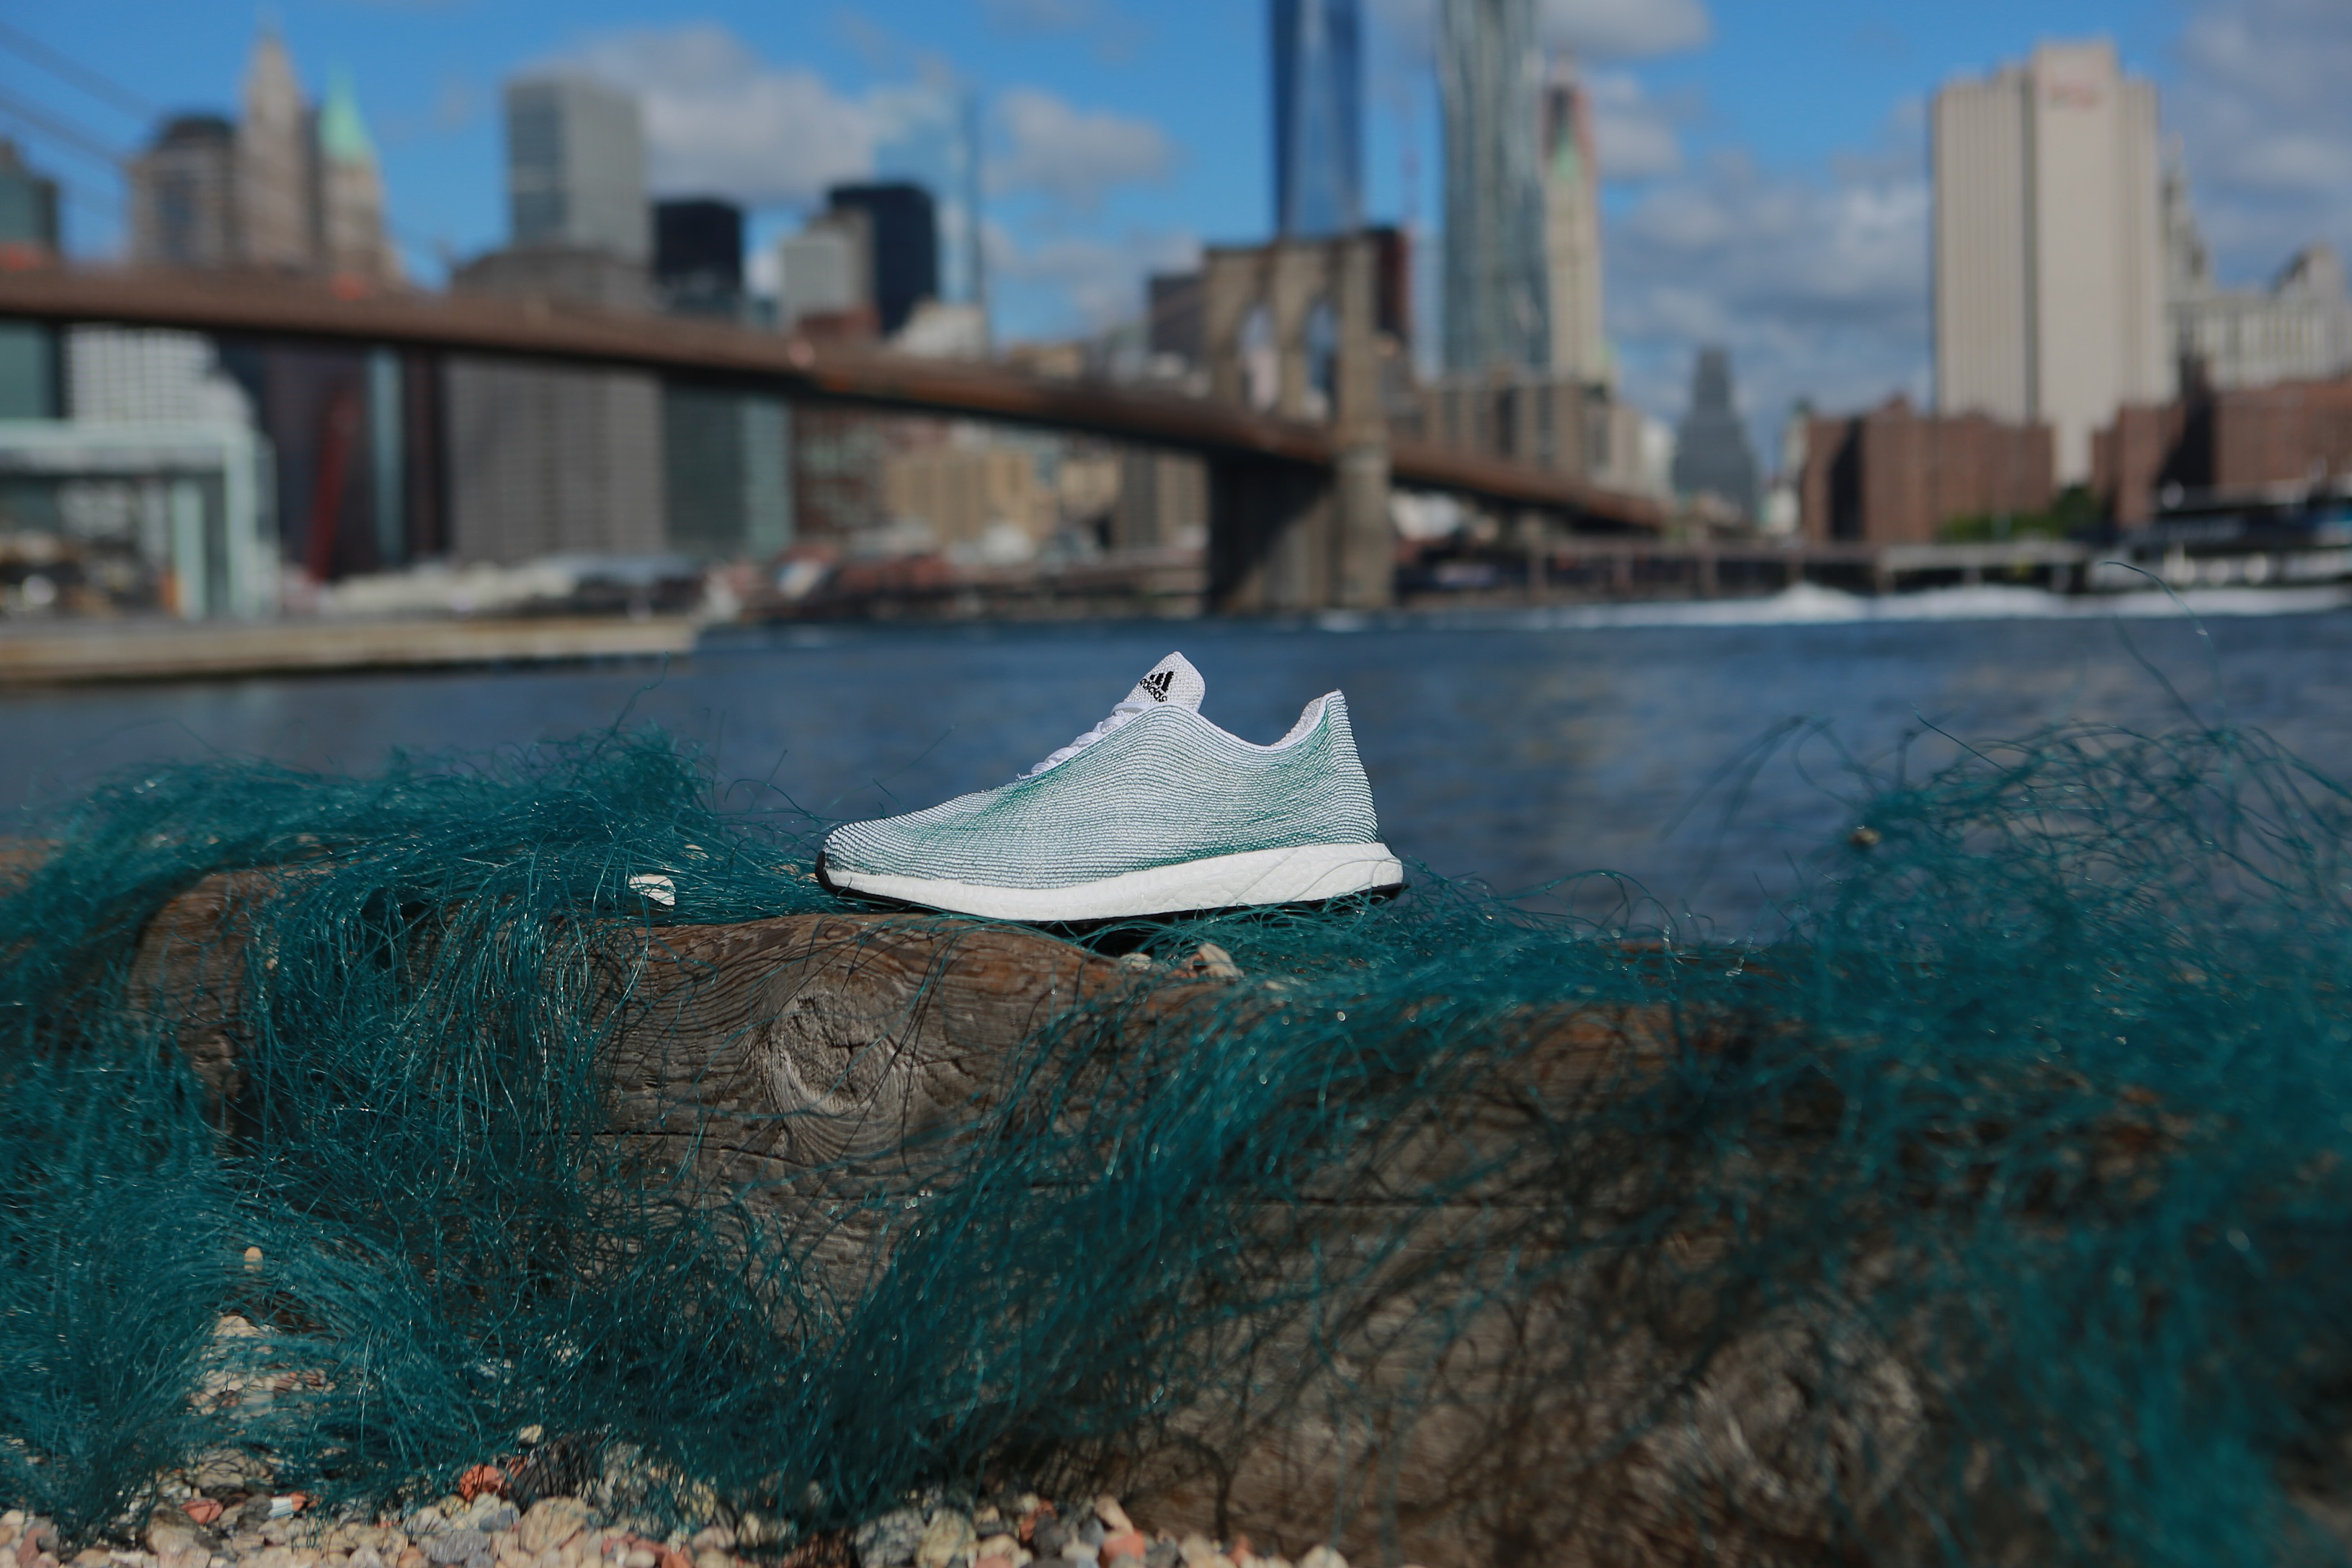 adidas and Parley for the oceans showcase